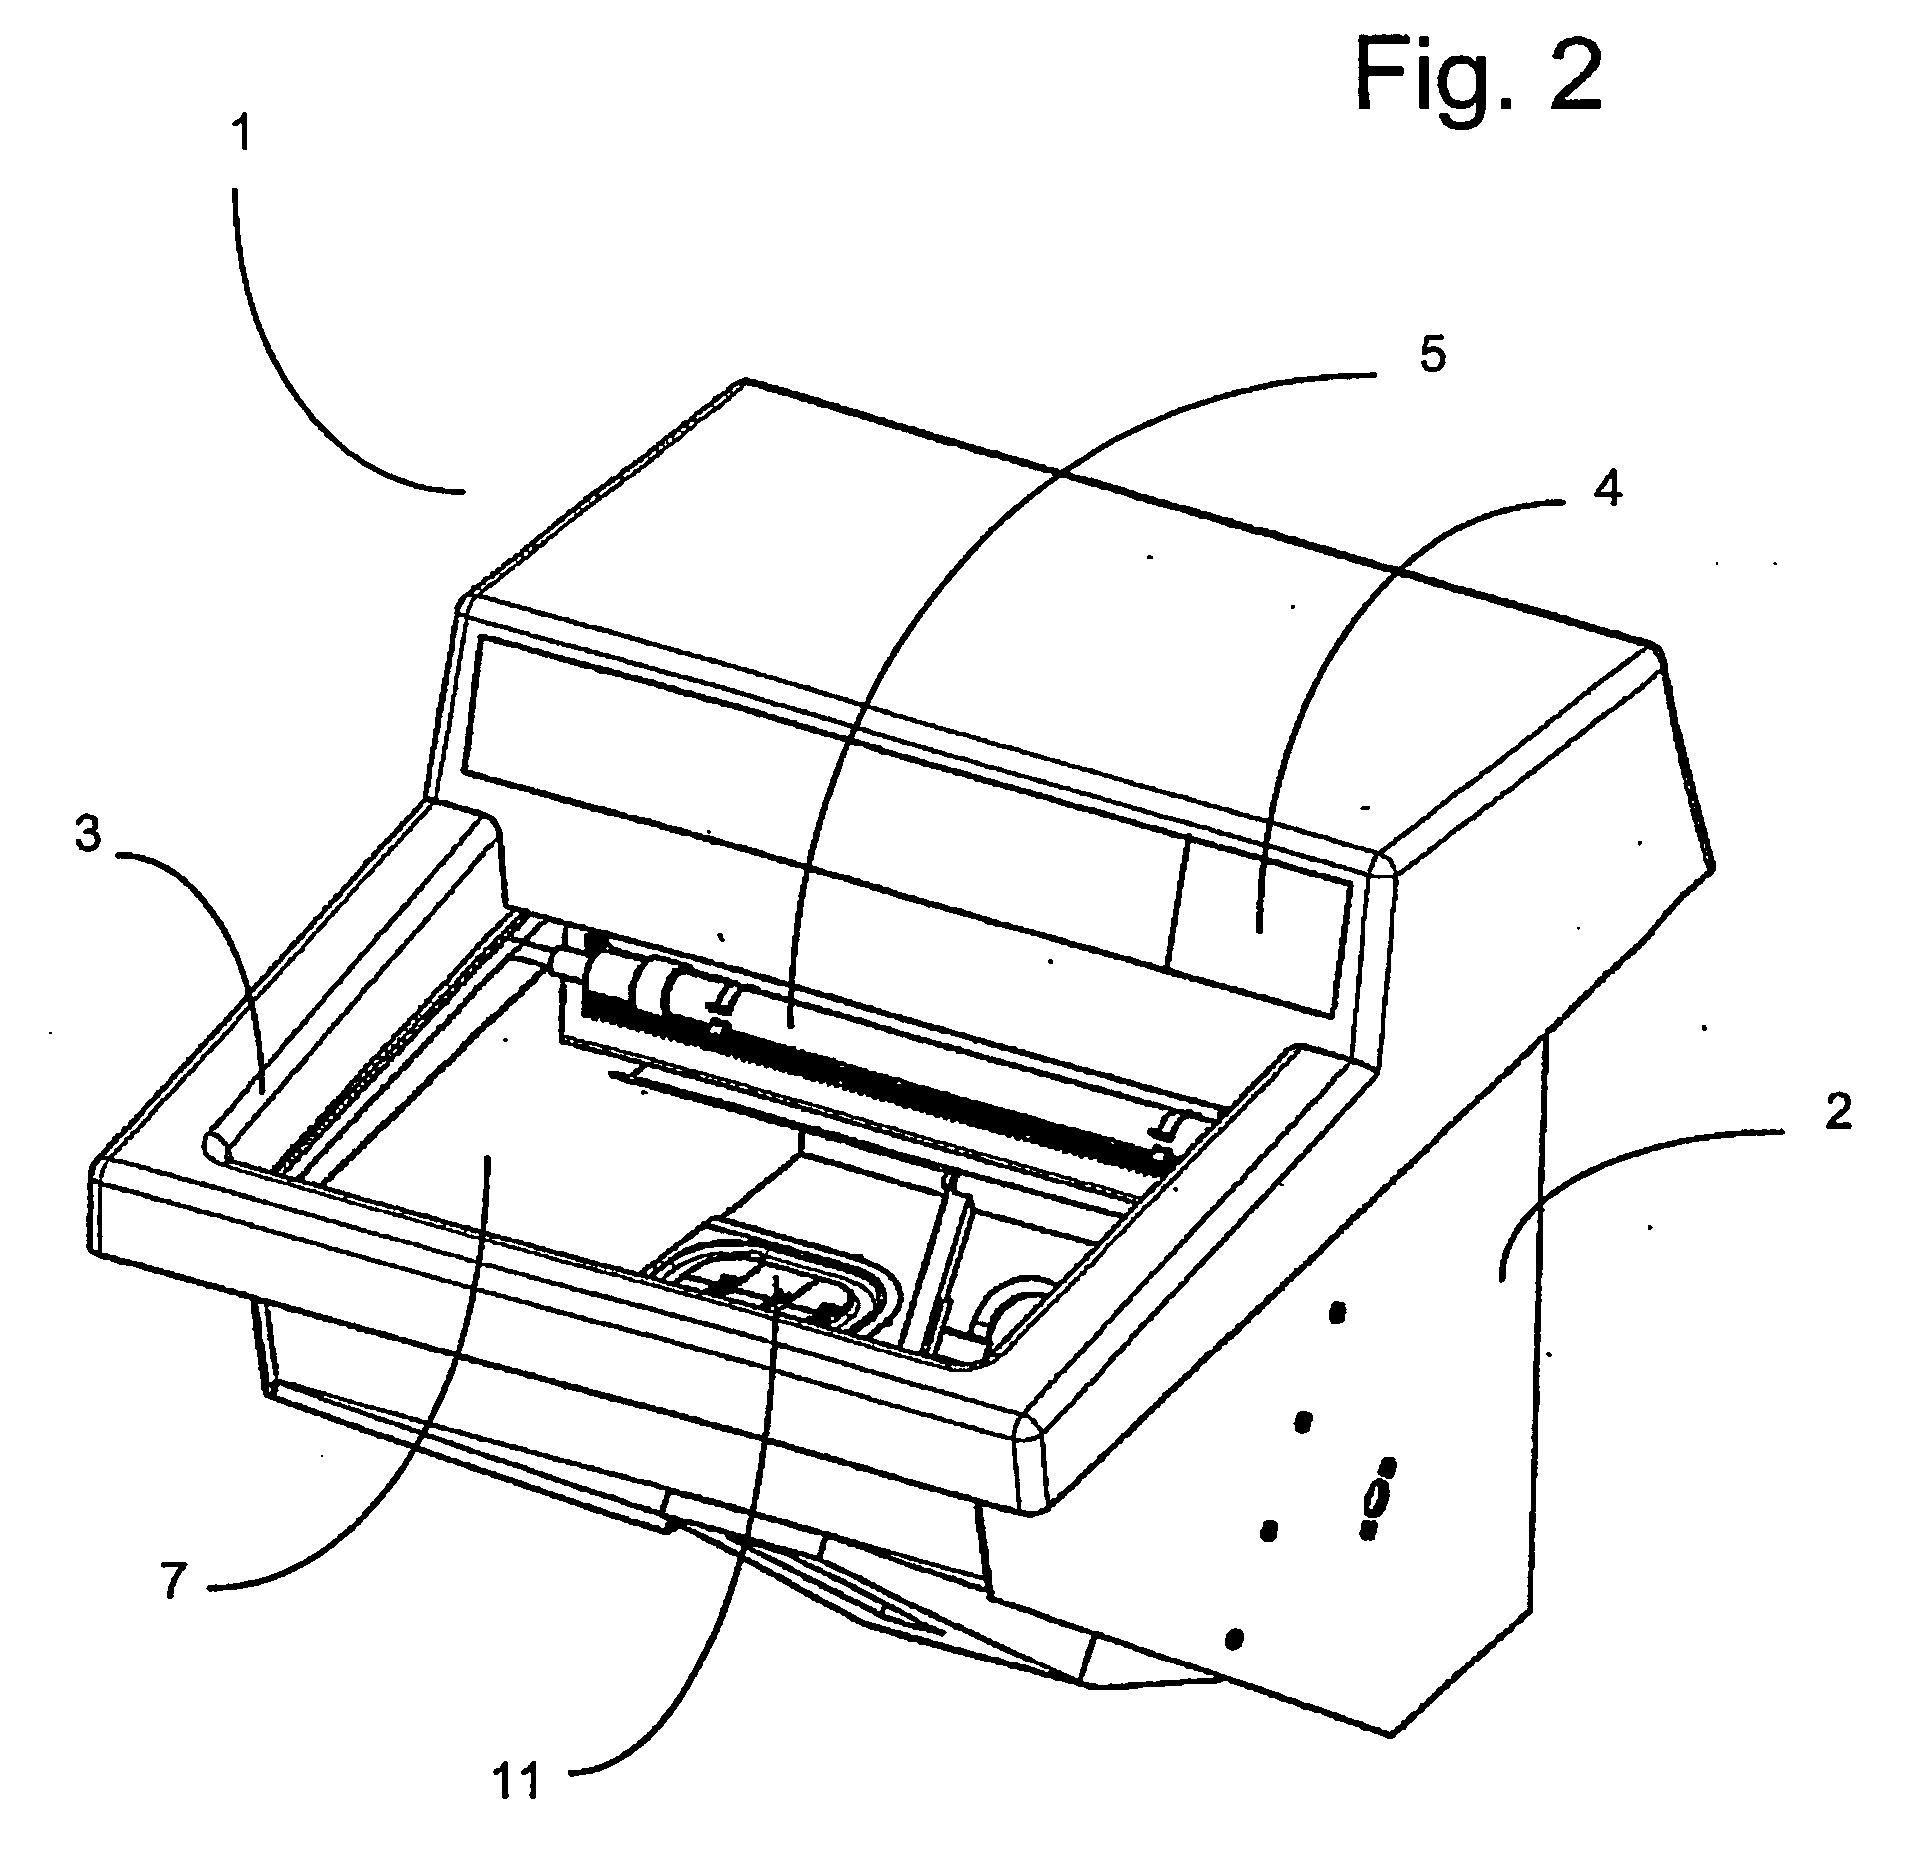 Desinfection device for a cryostat